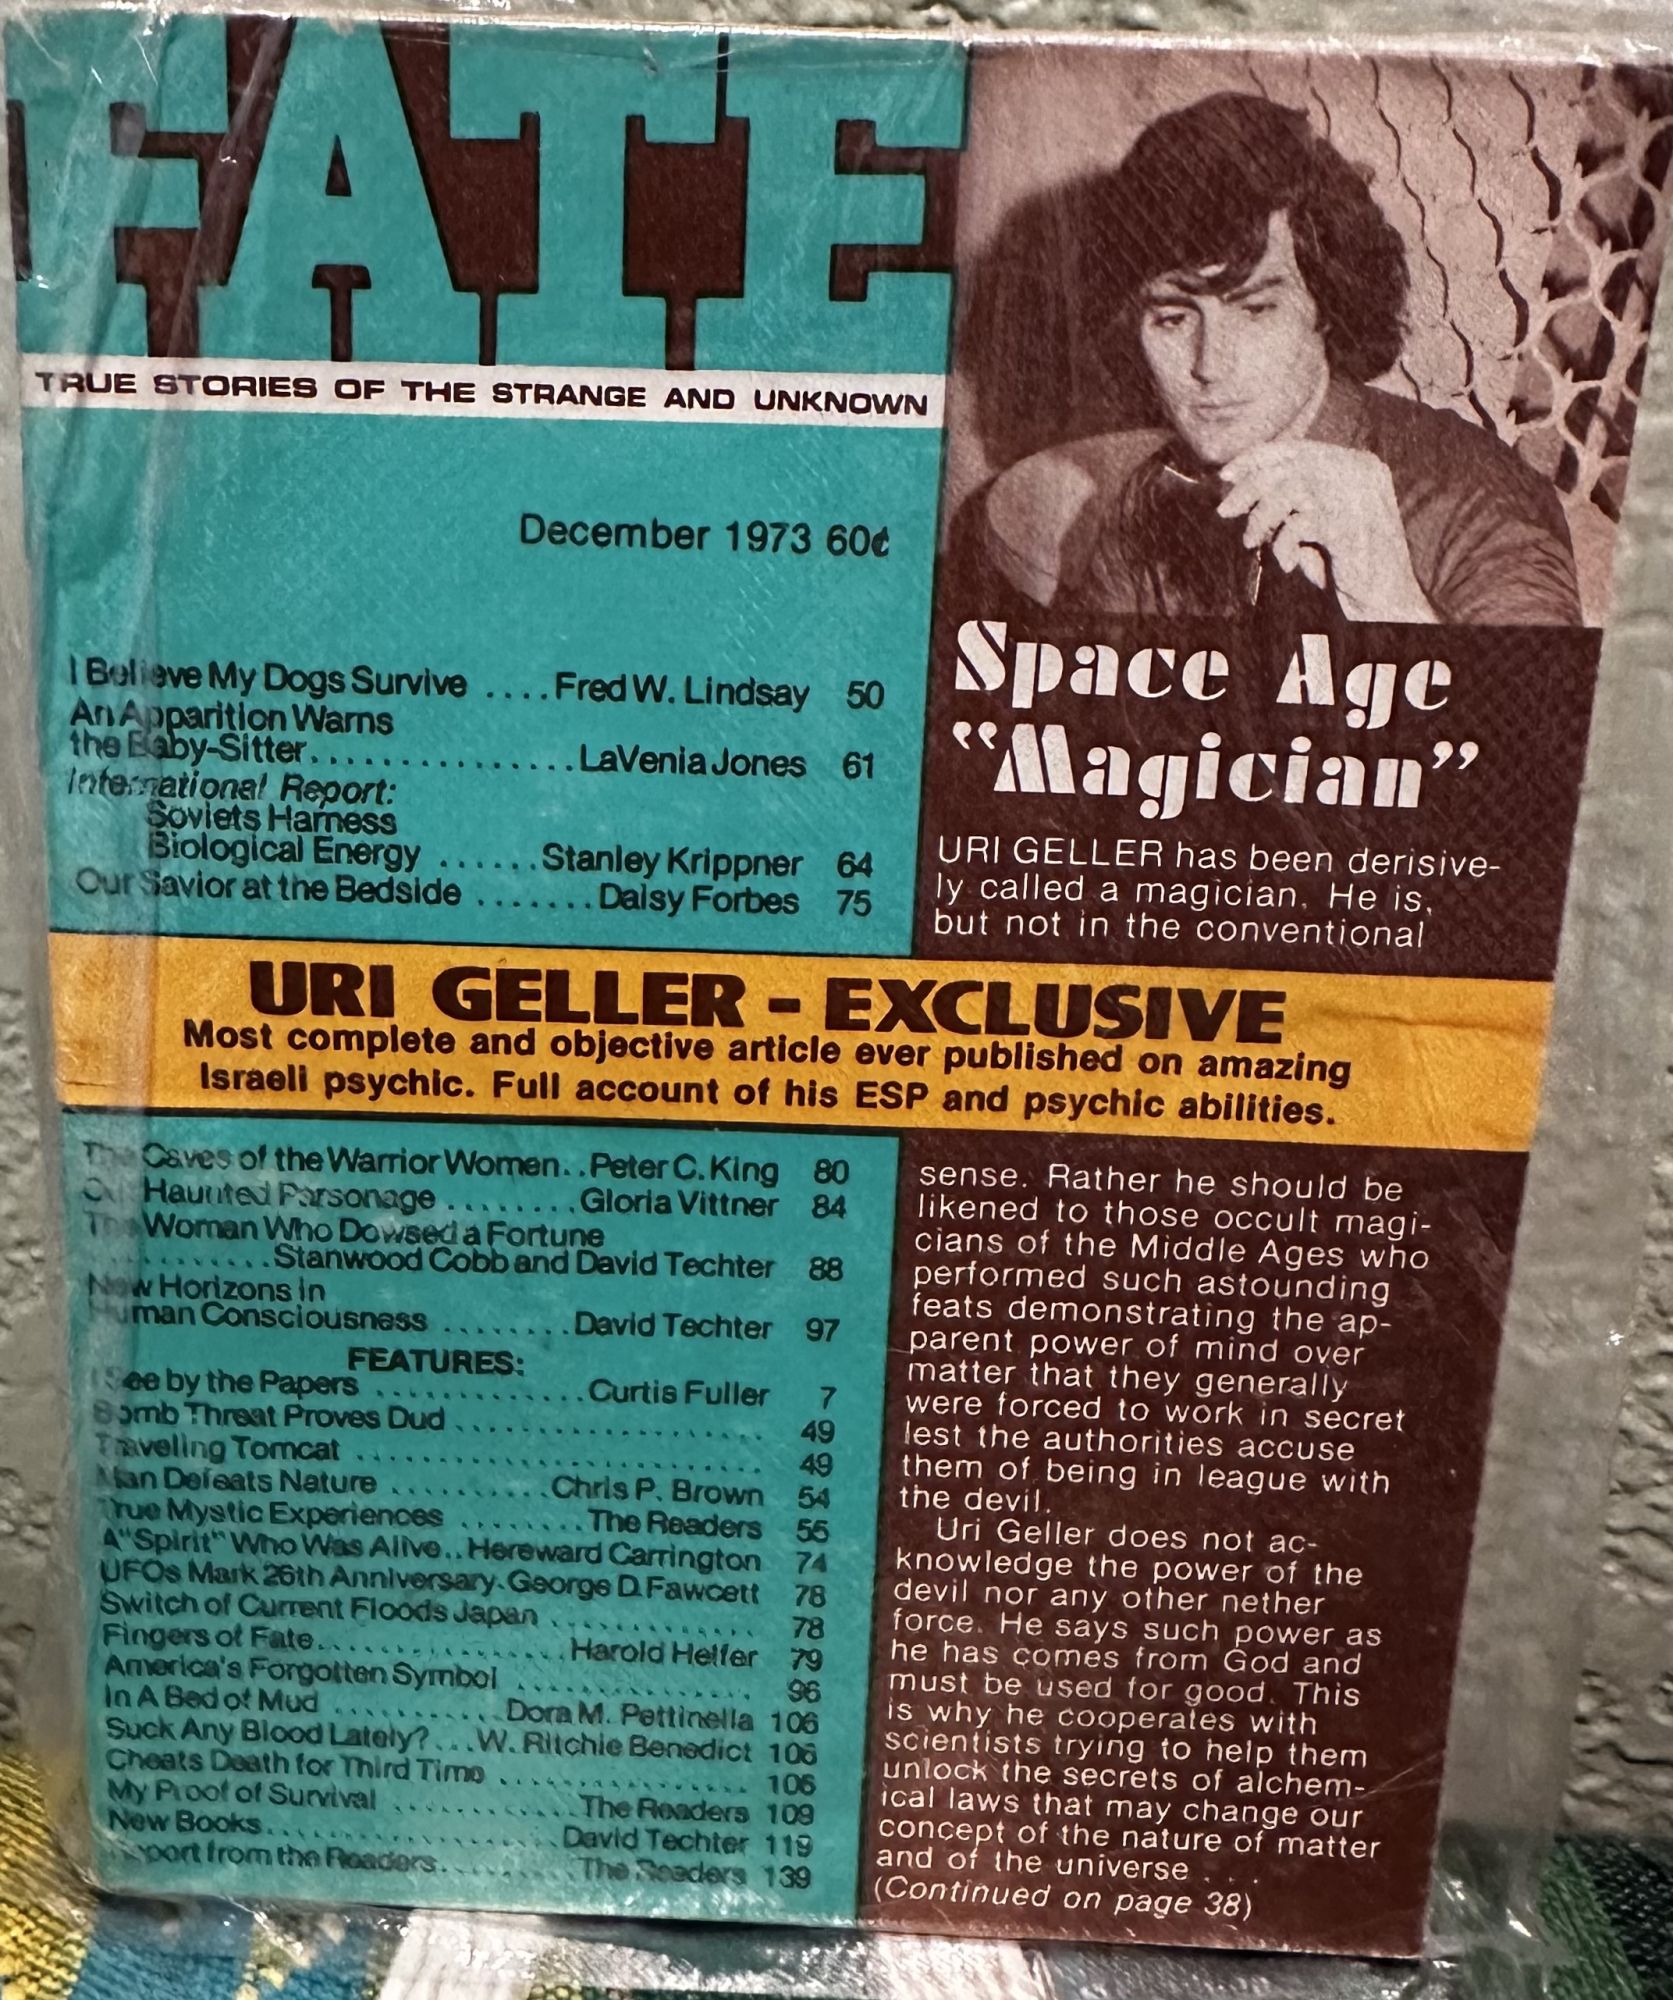 Fate Magazine; True Stories of the Strange and Unknown December 1973 Vol. 26 No.12 Issue 285. Mary Margaret Fuller.